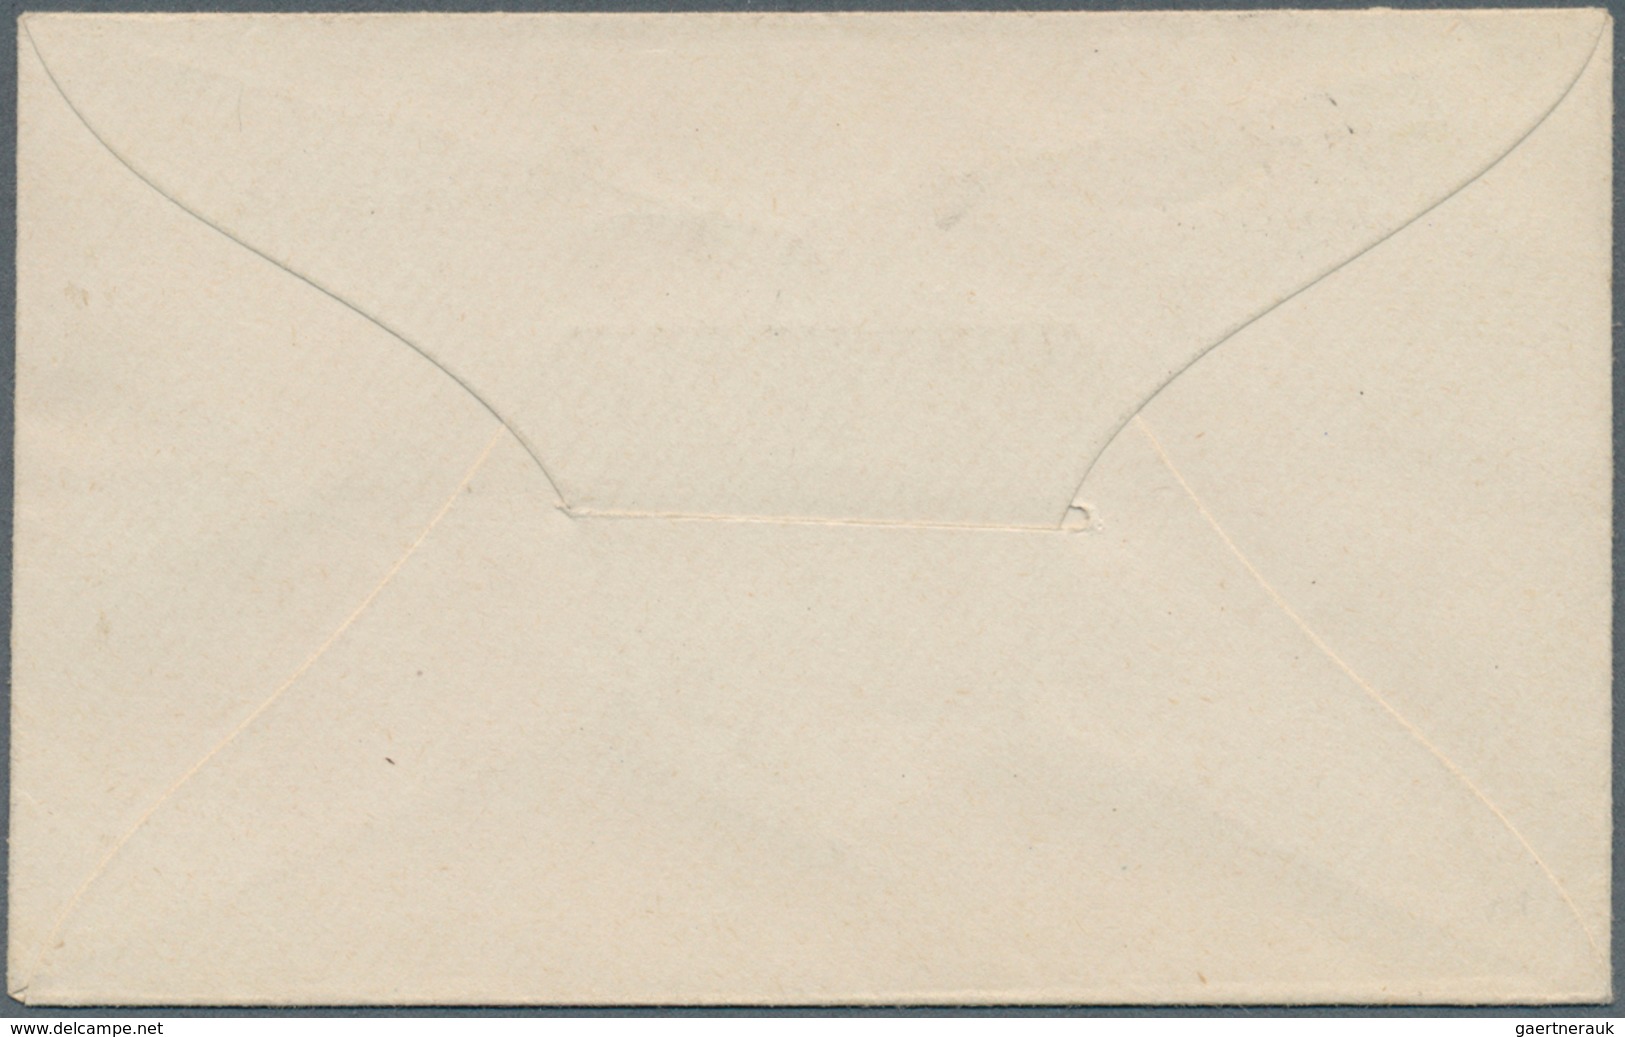 23669 Mocambique: 1895/1917, Mocambique/Area, group of eleven better entires with many attractive franking